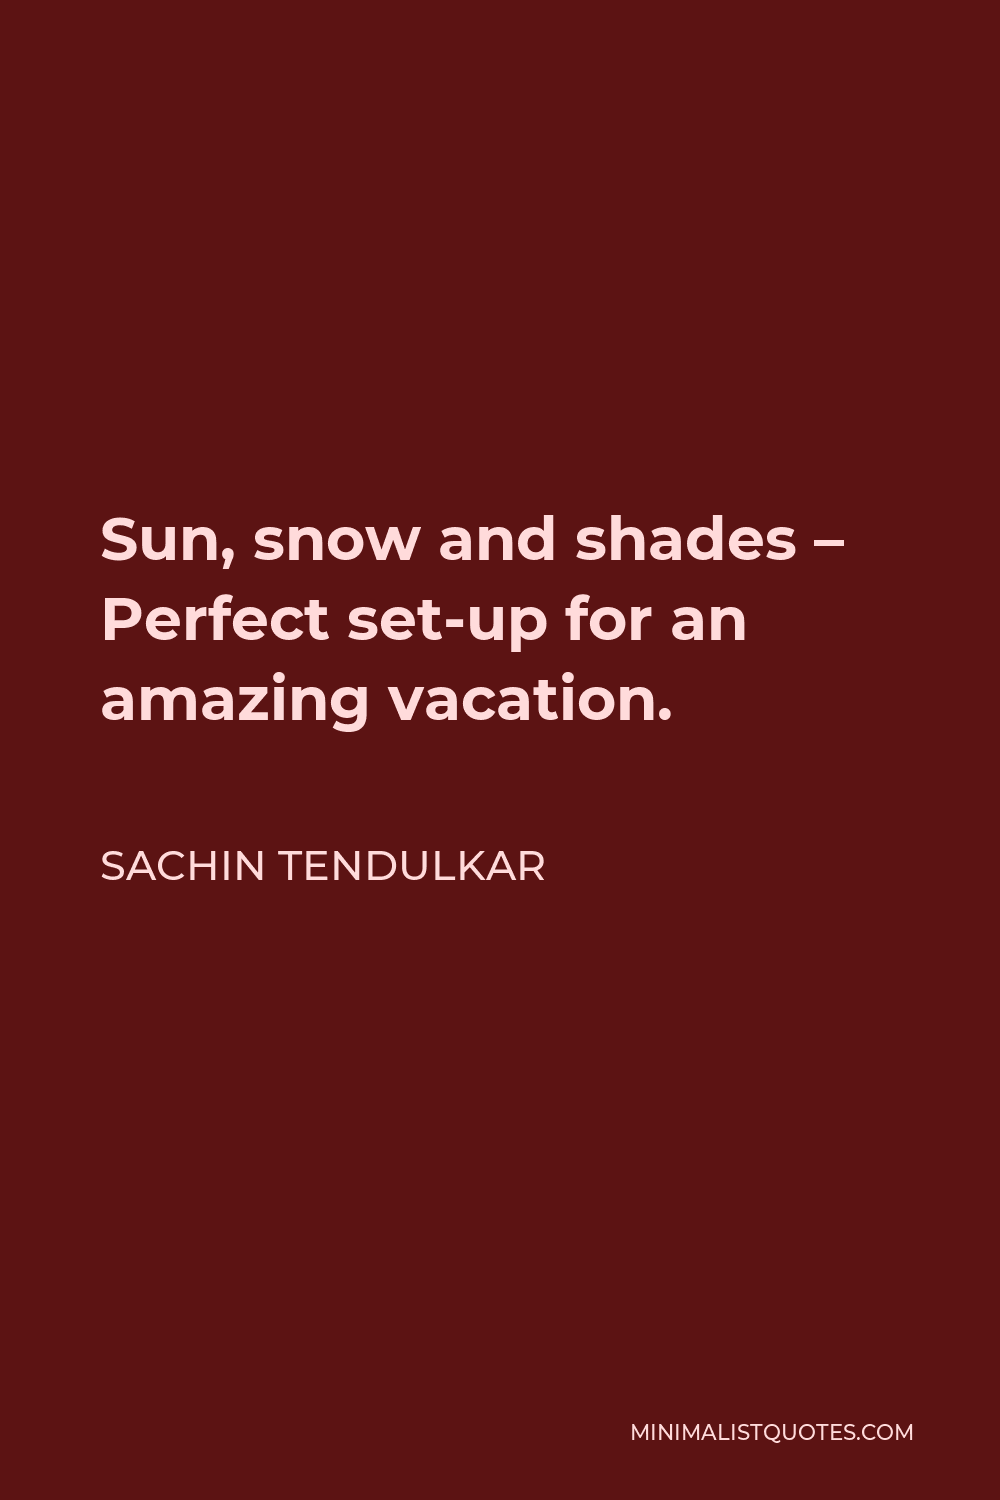 Sachin Tendulkar Quote - Sun, snow and shades – Perfect set-up for an amazing vacation.